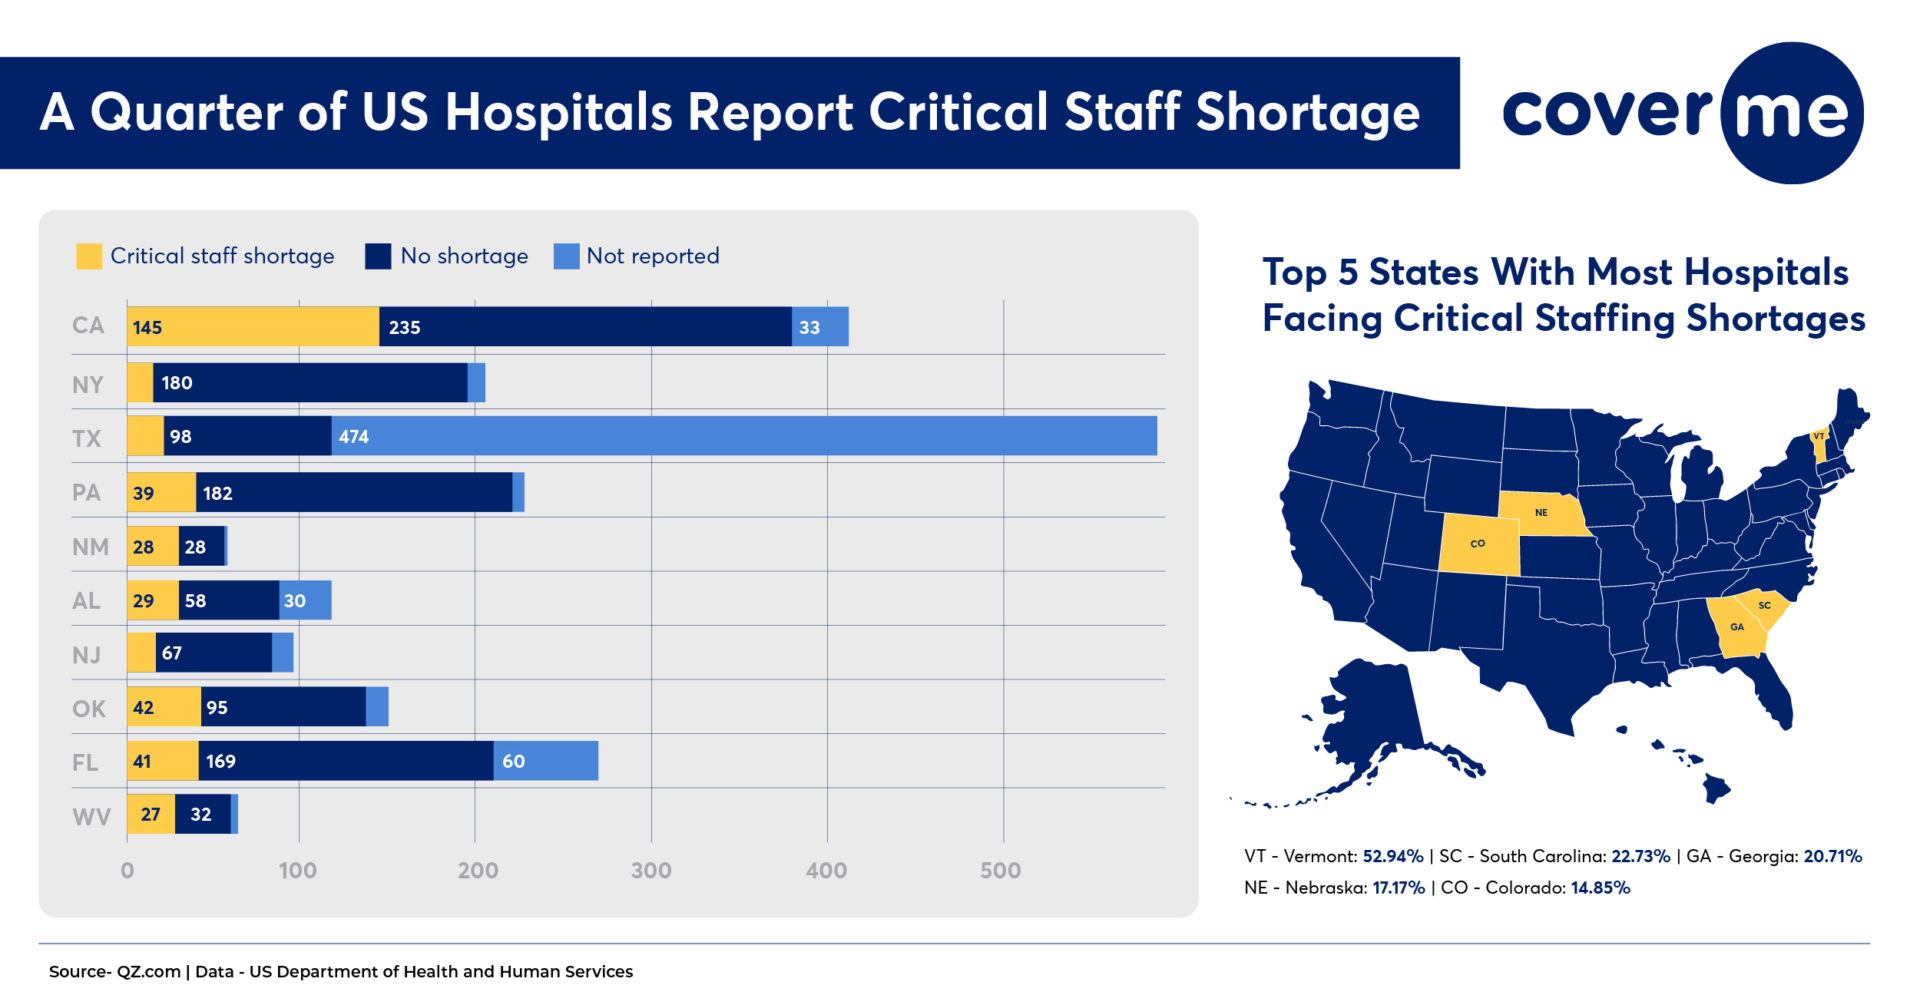 an infographic showing a bar graph on the left to denote the level of staffing shortages in ten states in the US and a US map in dark blue background on the right where the top 5 states with the most staffing shortages are highlighted in yellow.